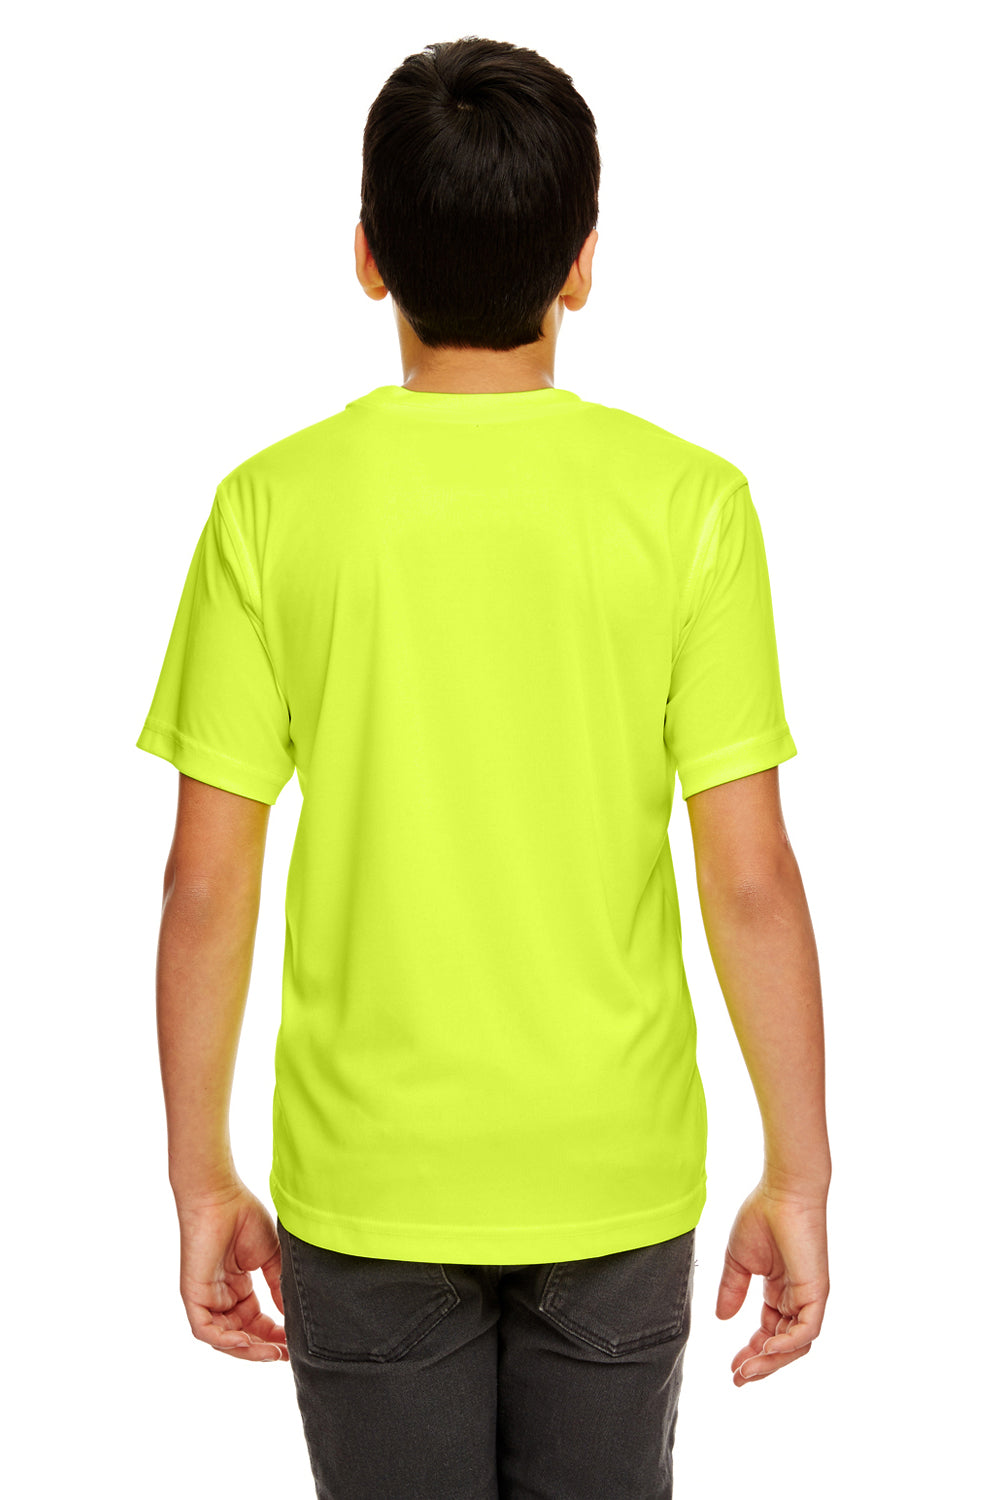 UltraClub 8420Y Youth Cool & Dry Performance Moisture Wicking Short Sleeve Crewneck T-Shirt Bright Yellow Back